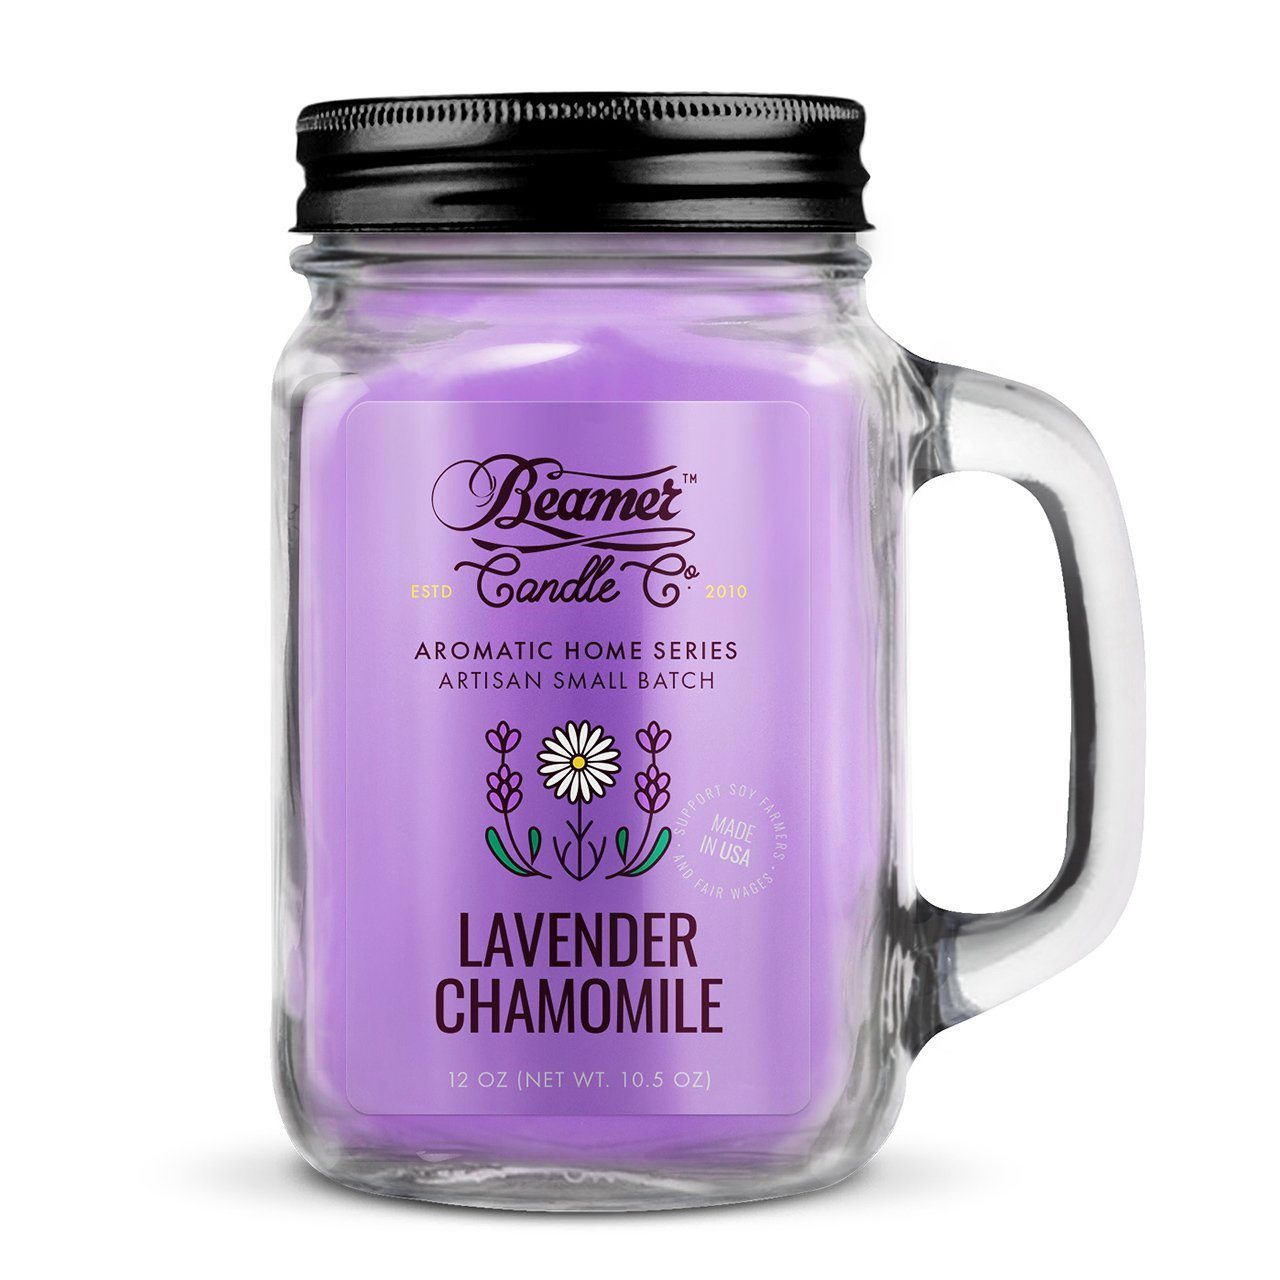 Beamer Candle Company - Aromatic Home Series - 12oz Mason Jar - Various Scents - (1 Count) Flower Power Packages Lavender Chamomile 